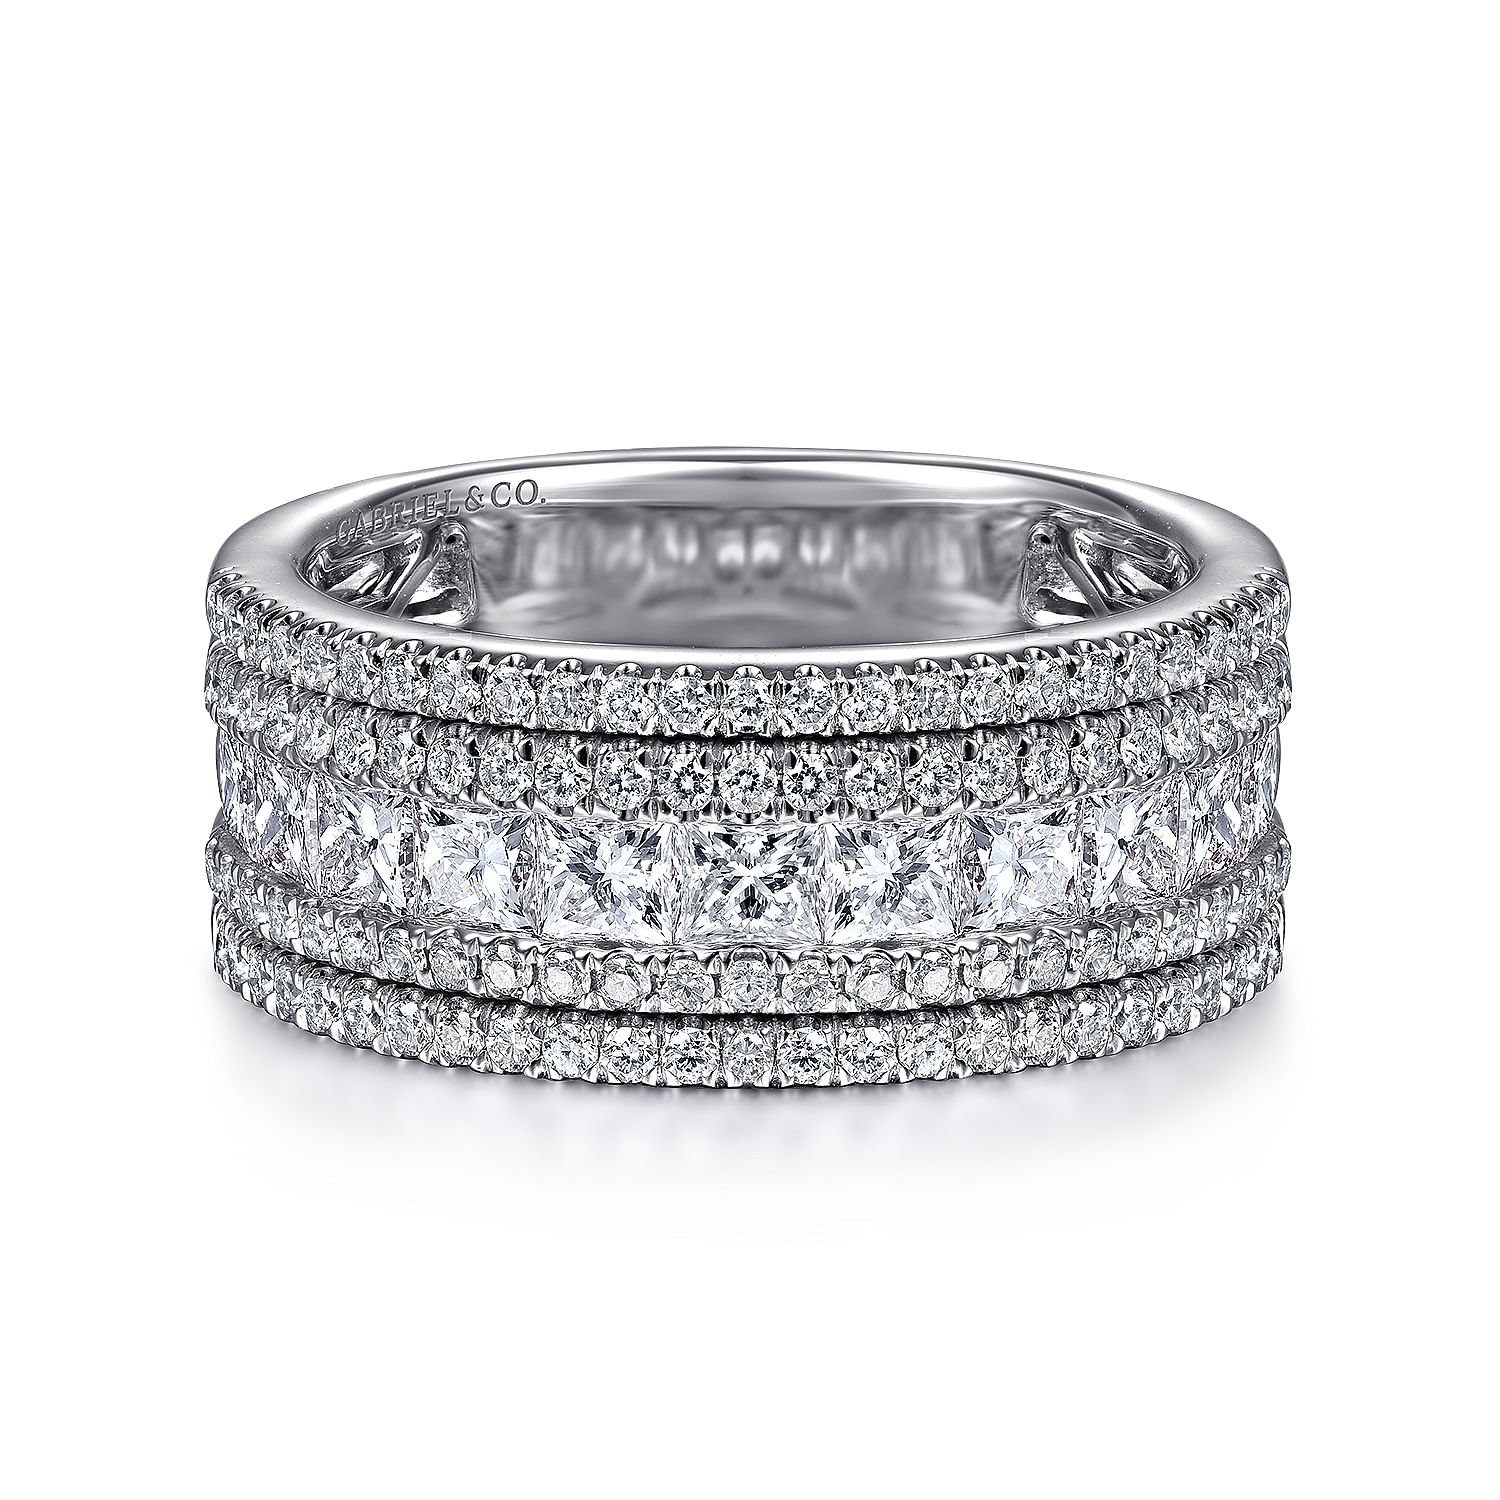 Wide 14K White Gold Channel Set Diamond Anniversary Band with Round and Princess Cut Diamonds